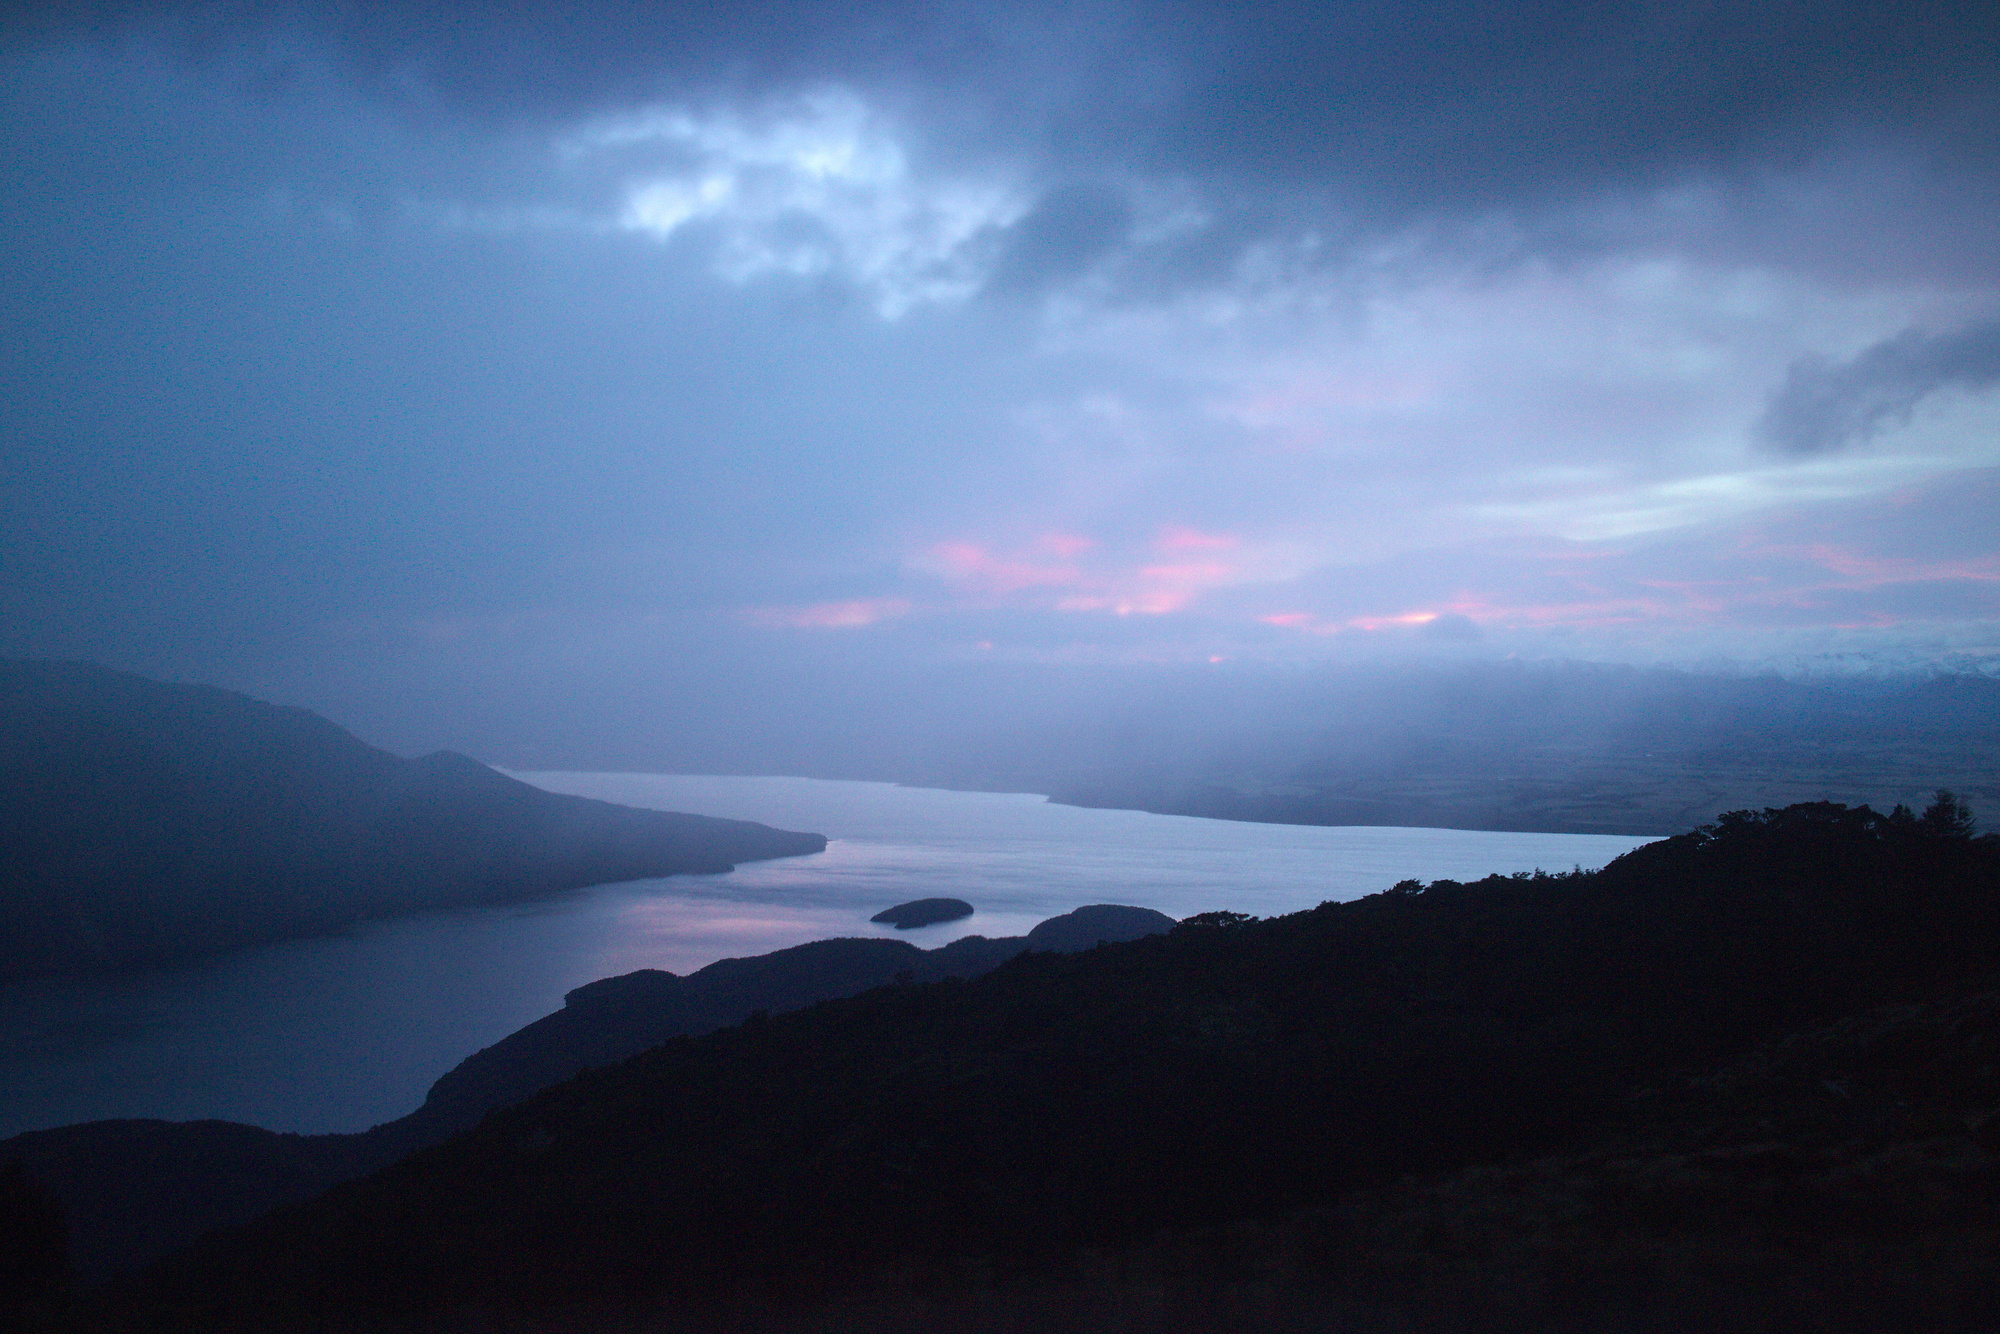 Early morning view over Lake Te Anau in Luxmore Hut on the Kepler track in Fiordland National Park